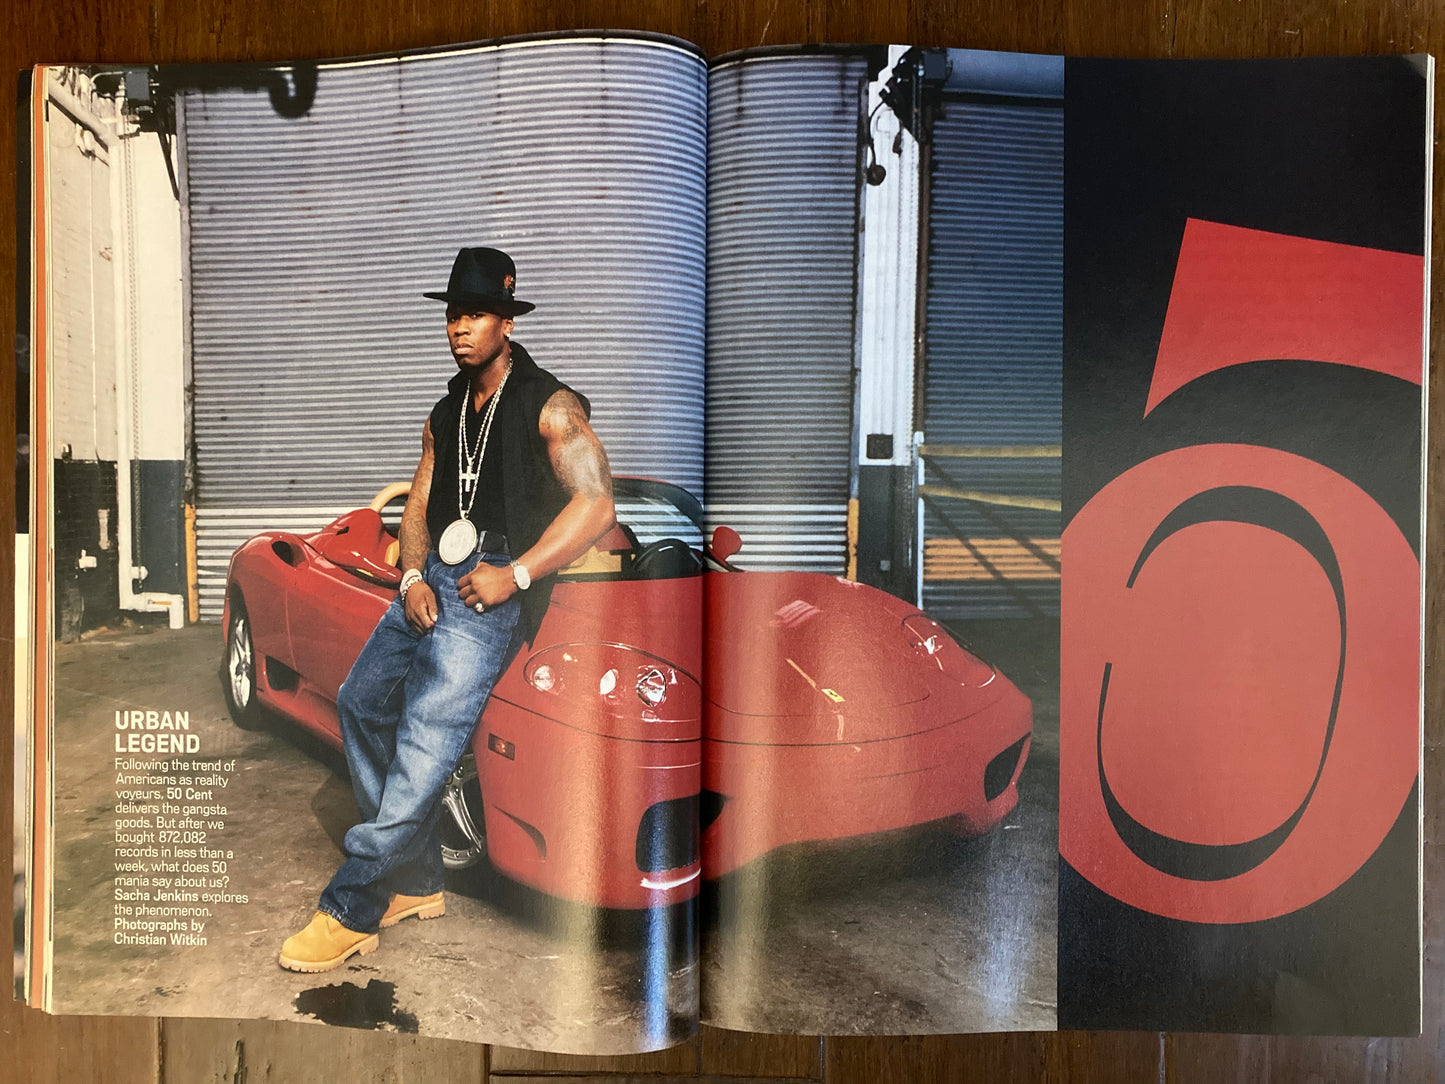 Vibe Magazine May 2003 50 Cent - MoSneaks Shop Online